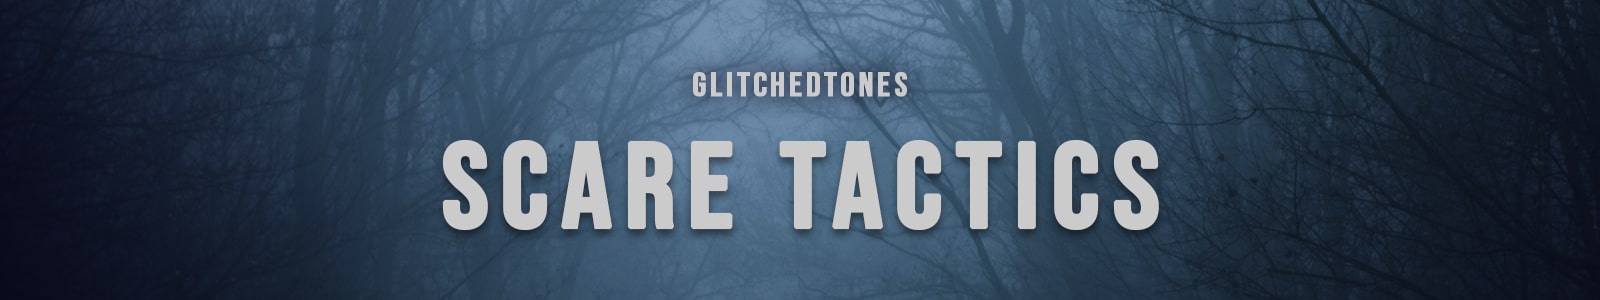 scare tactics by glitchedtones